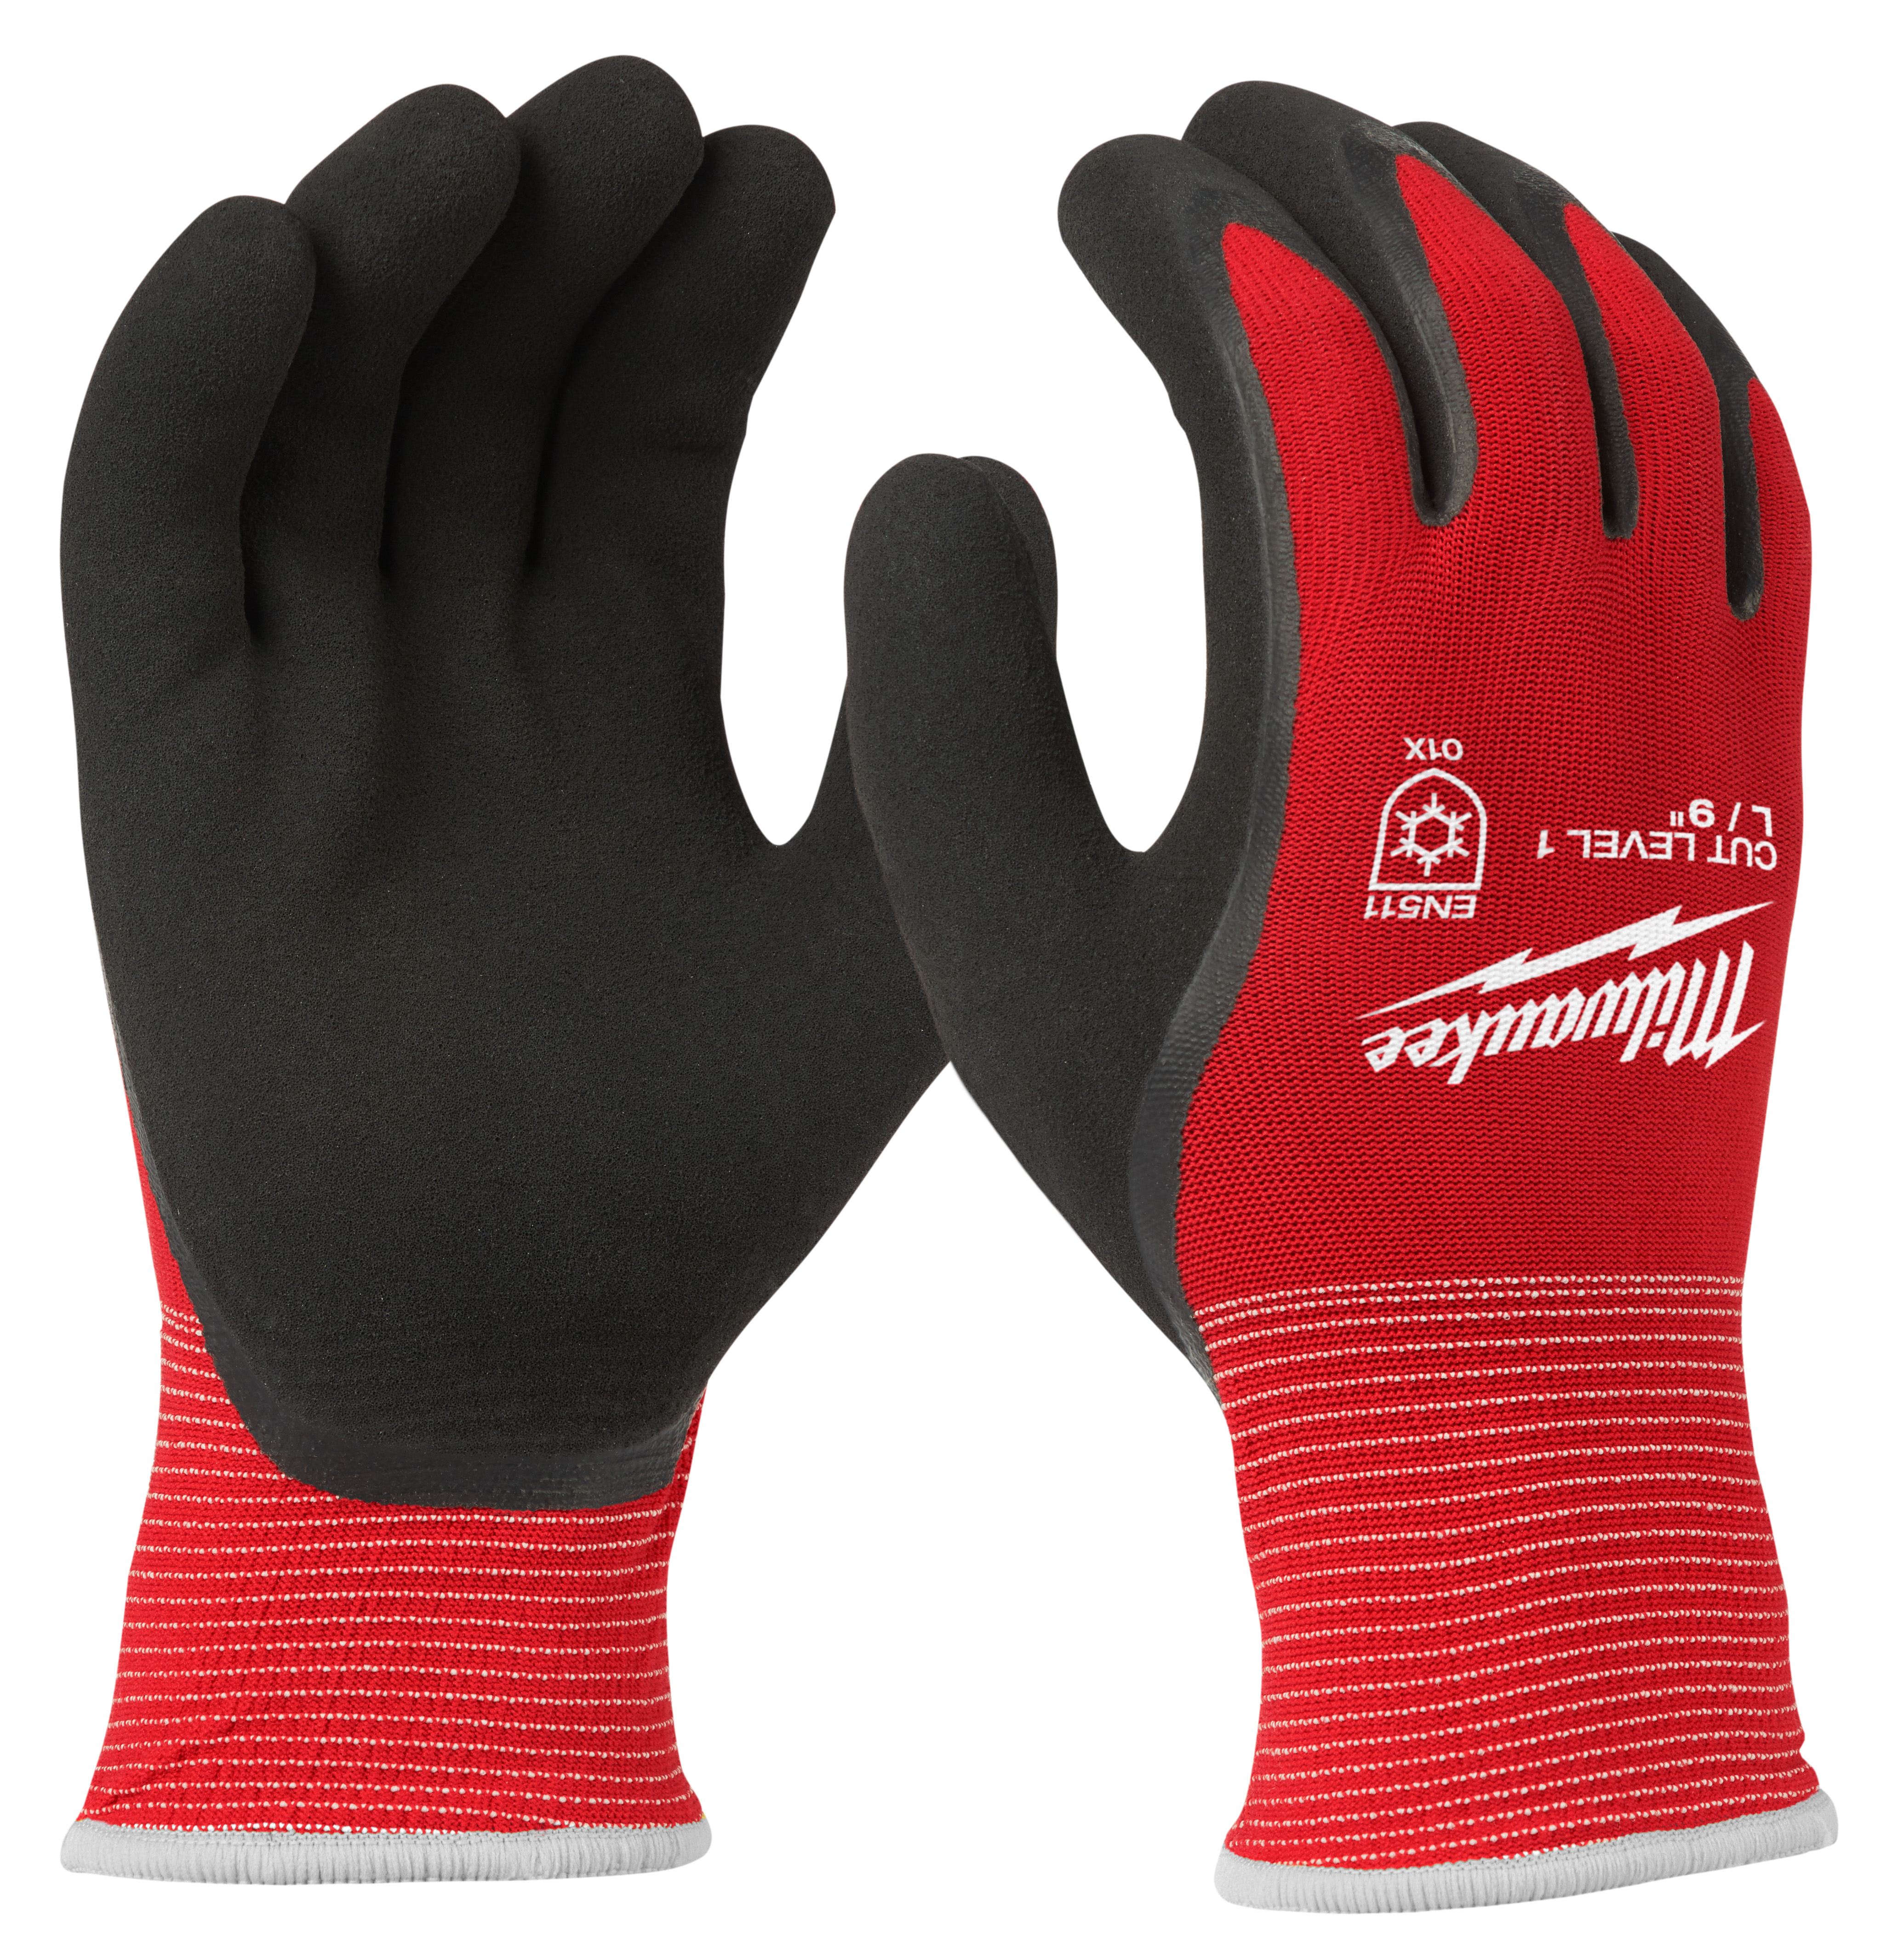 Cut Level 1 Insulated Gloves - S - 12 Pack